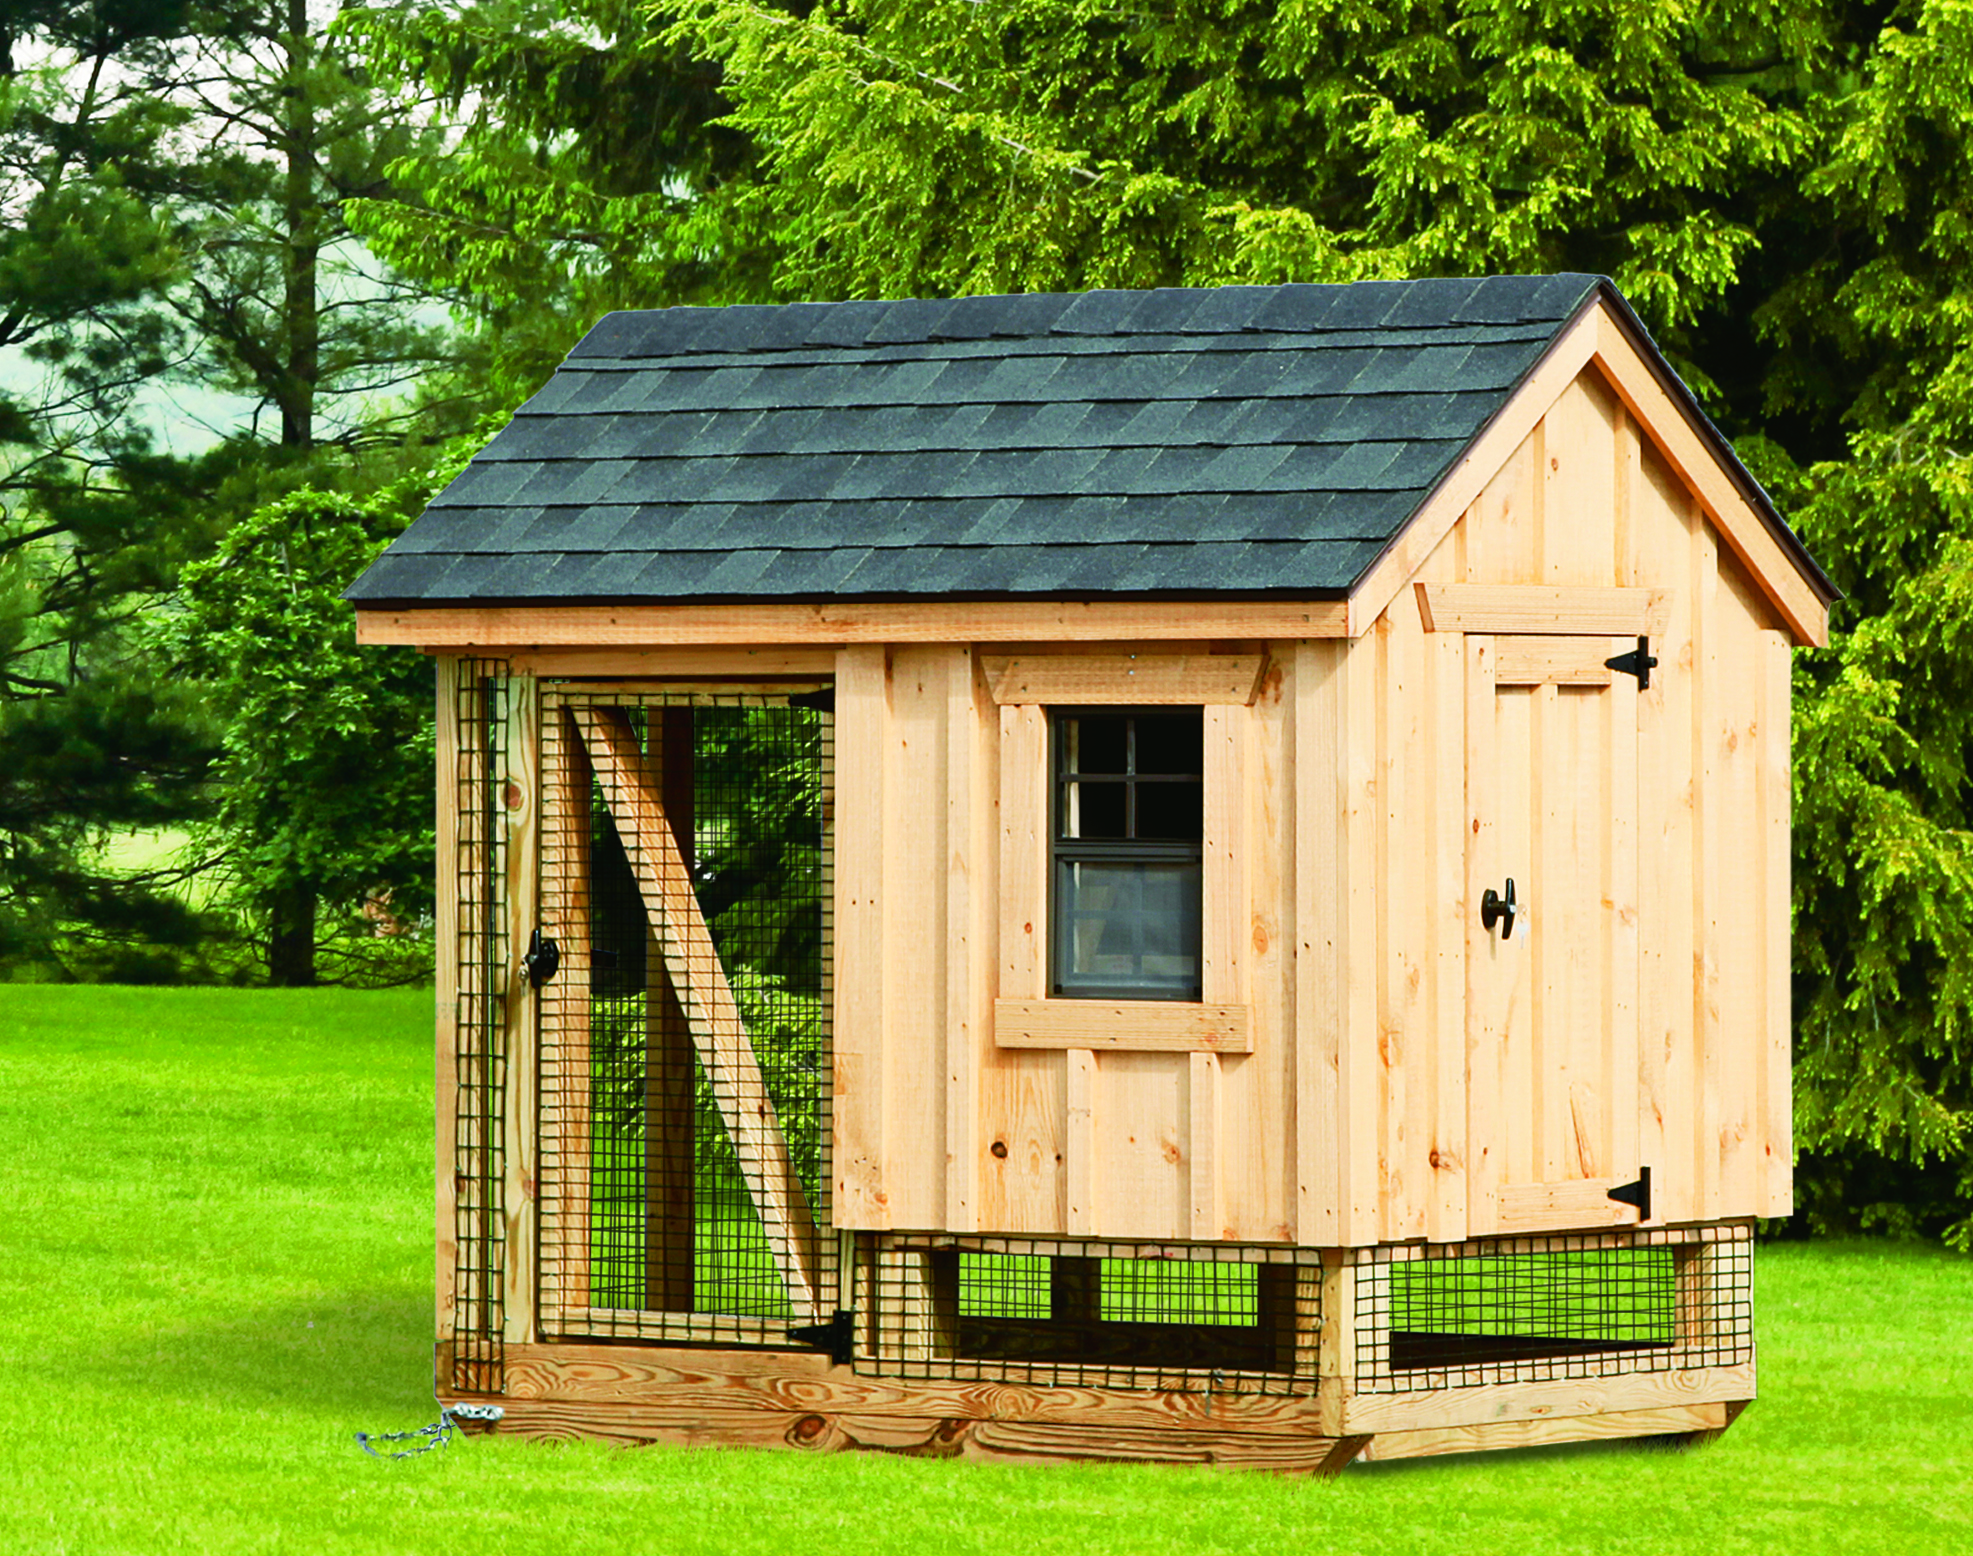 Tips for Buying a Chicken Coop and Raising Backyard Chickens